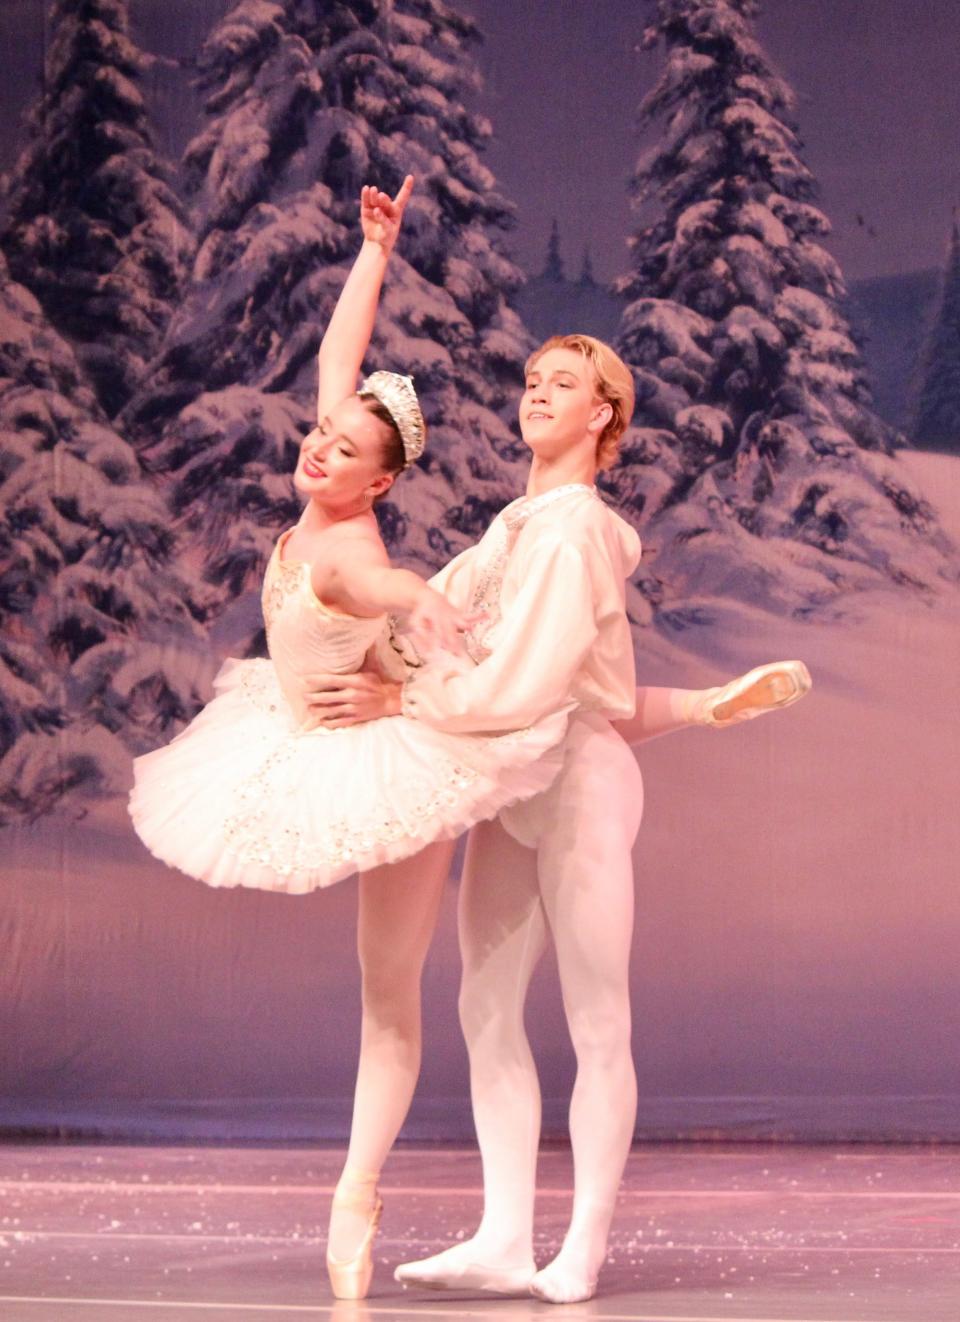 Paris Ballet and Dance’s full-length production of "The Nutcracker" will kick off the holidays on Saturday and Sunday at the Palm Beach State College Eissey Campus Theatre.